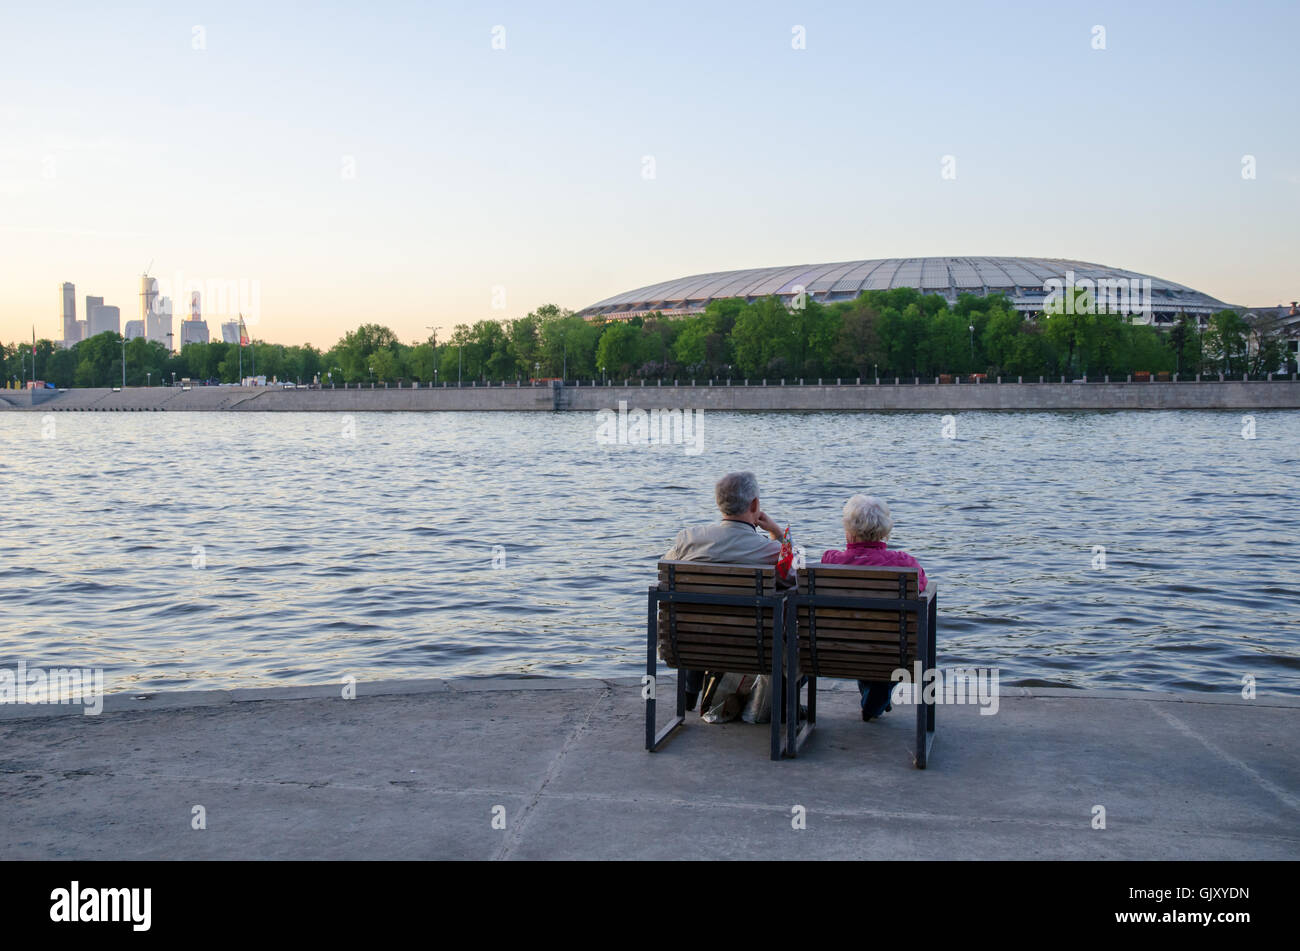 Two elderly people sitting on the bank of the river in chairs Stock Photo